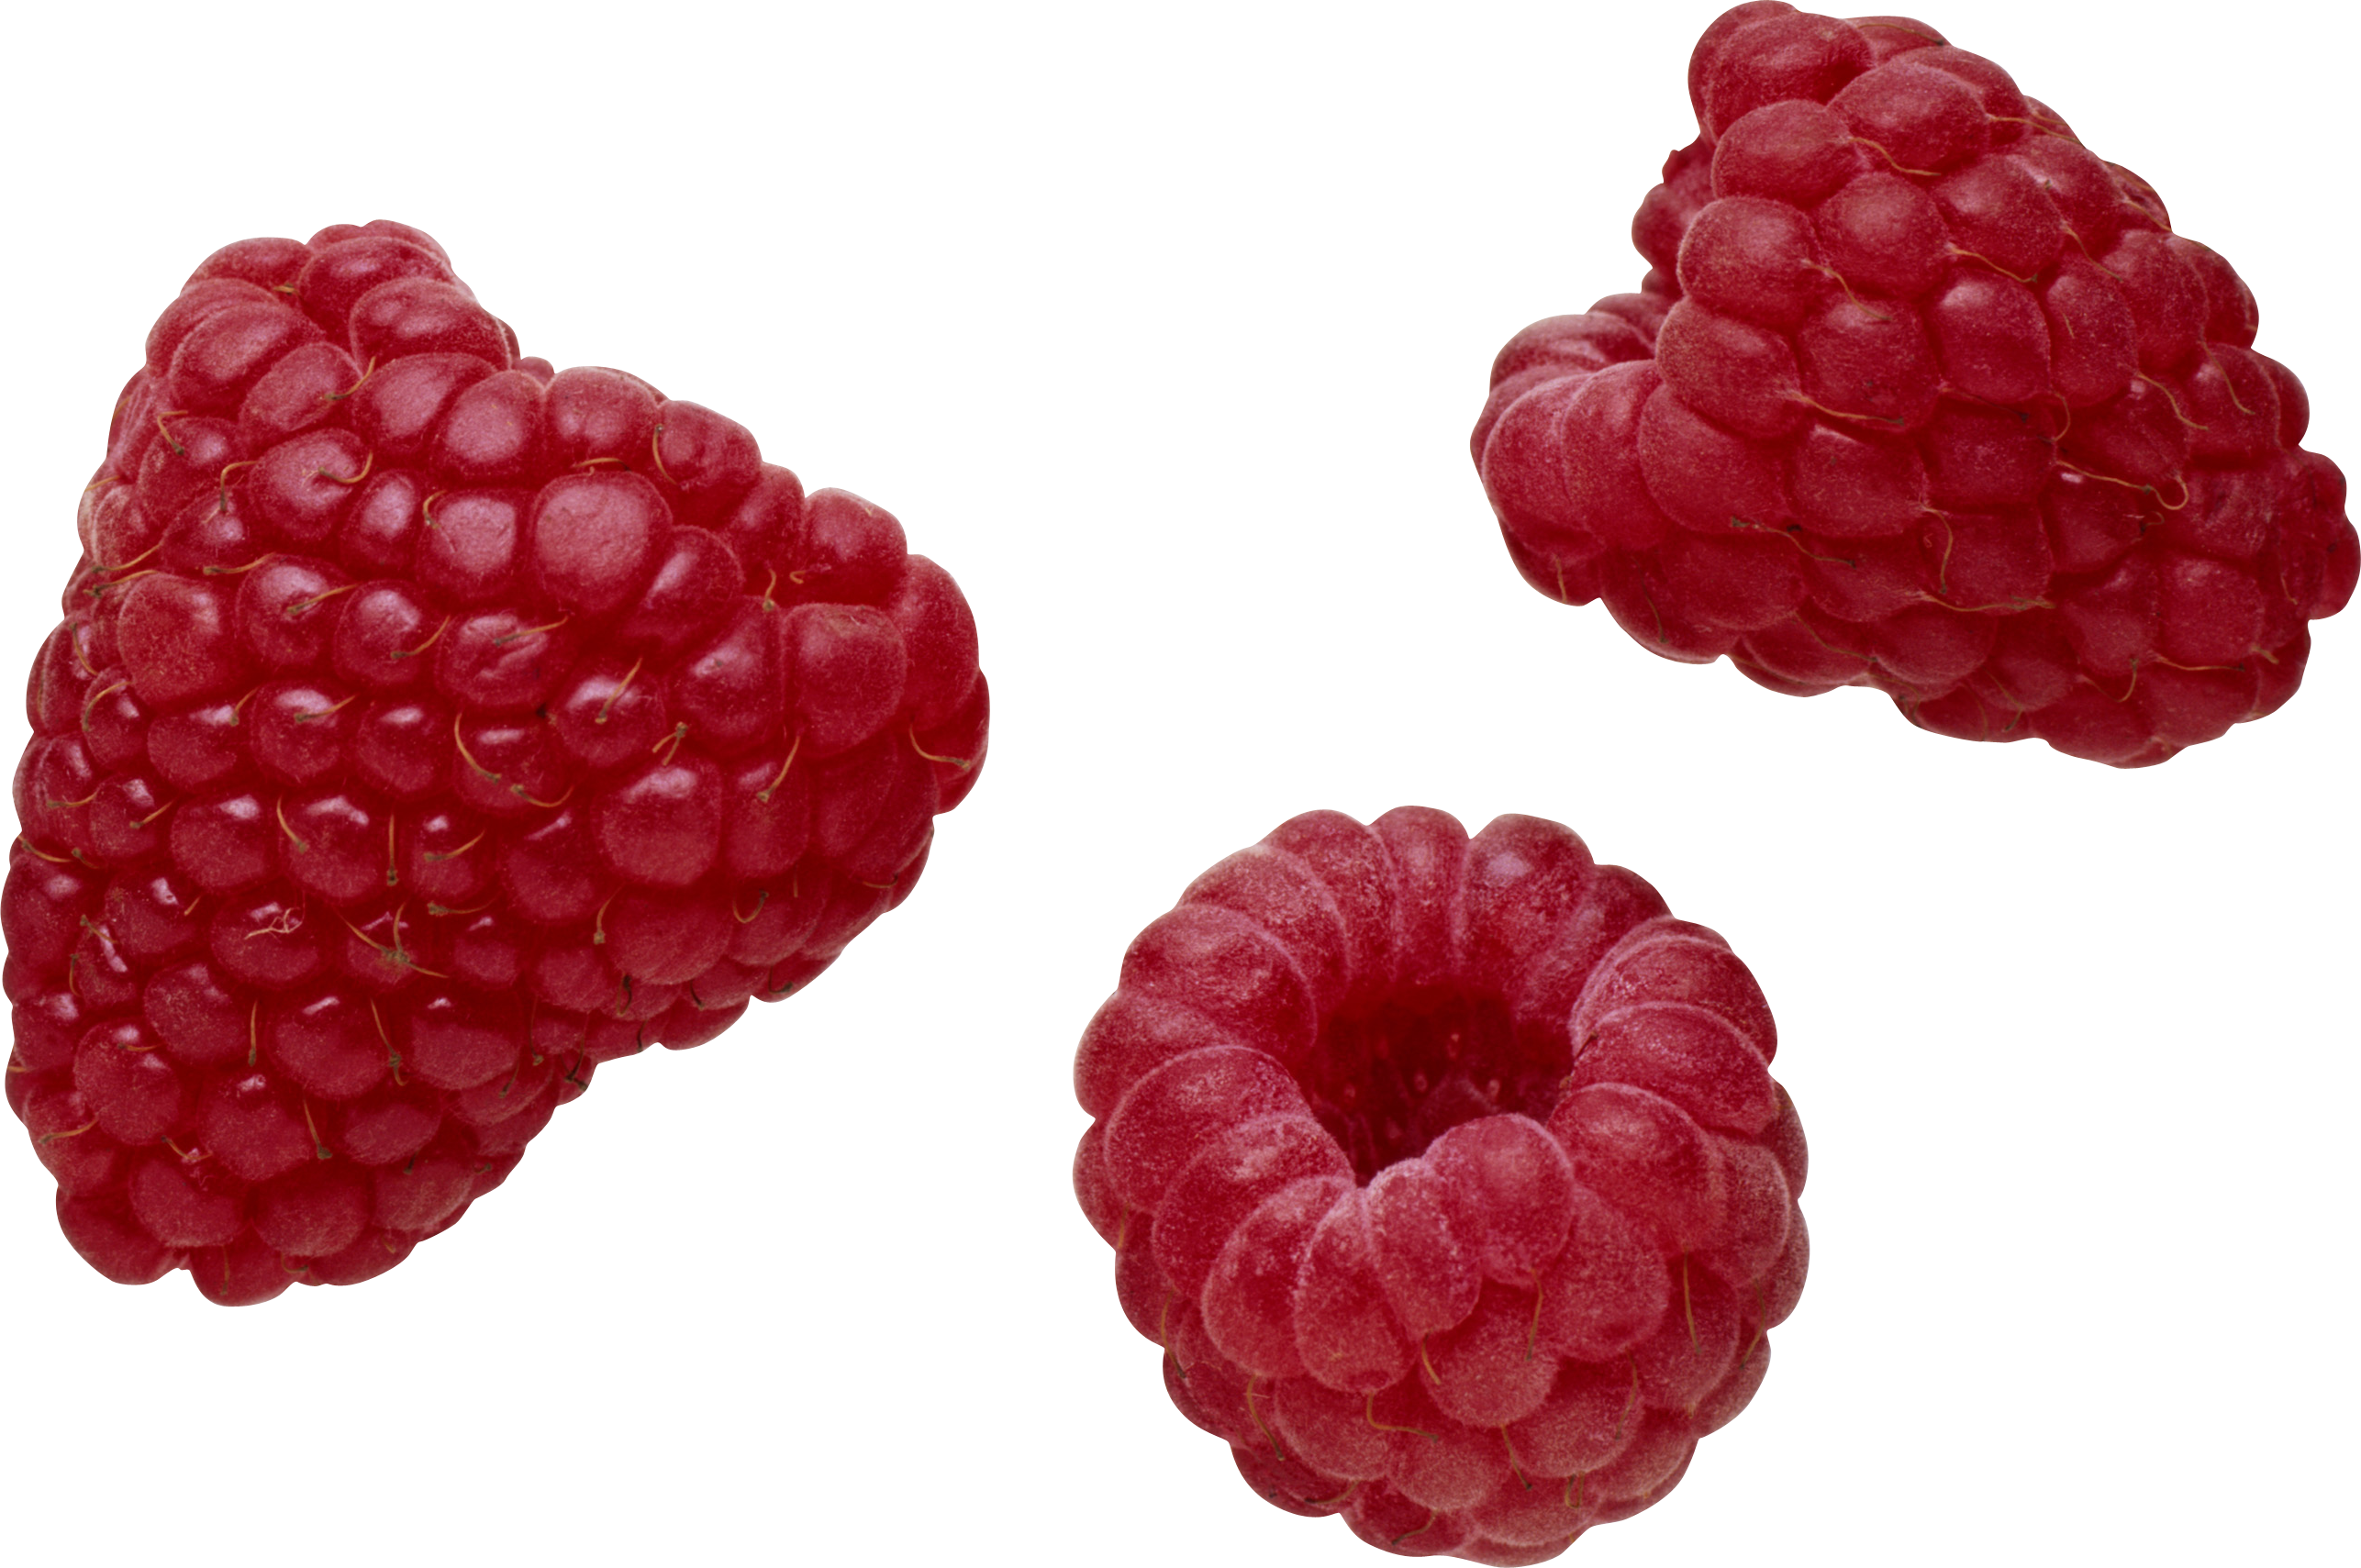 Raspberry PNG images free pictures download.